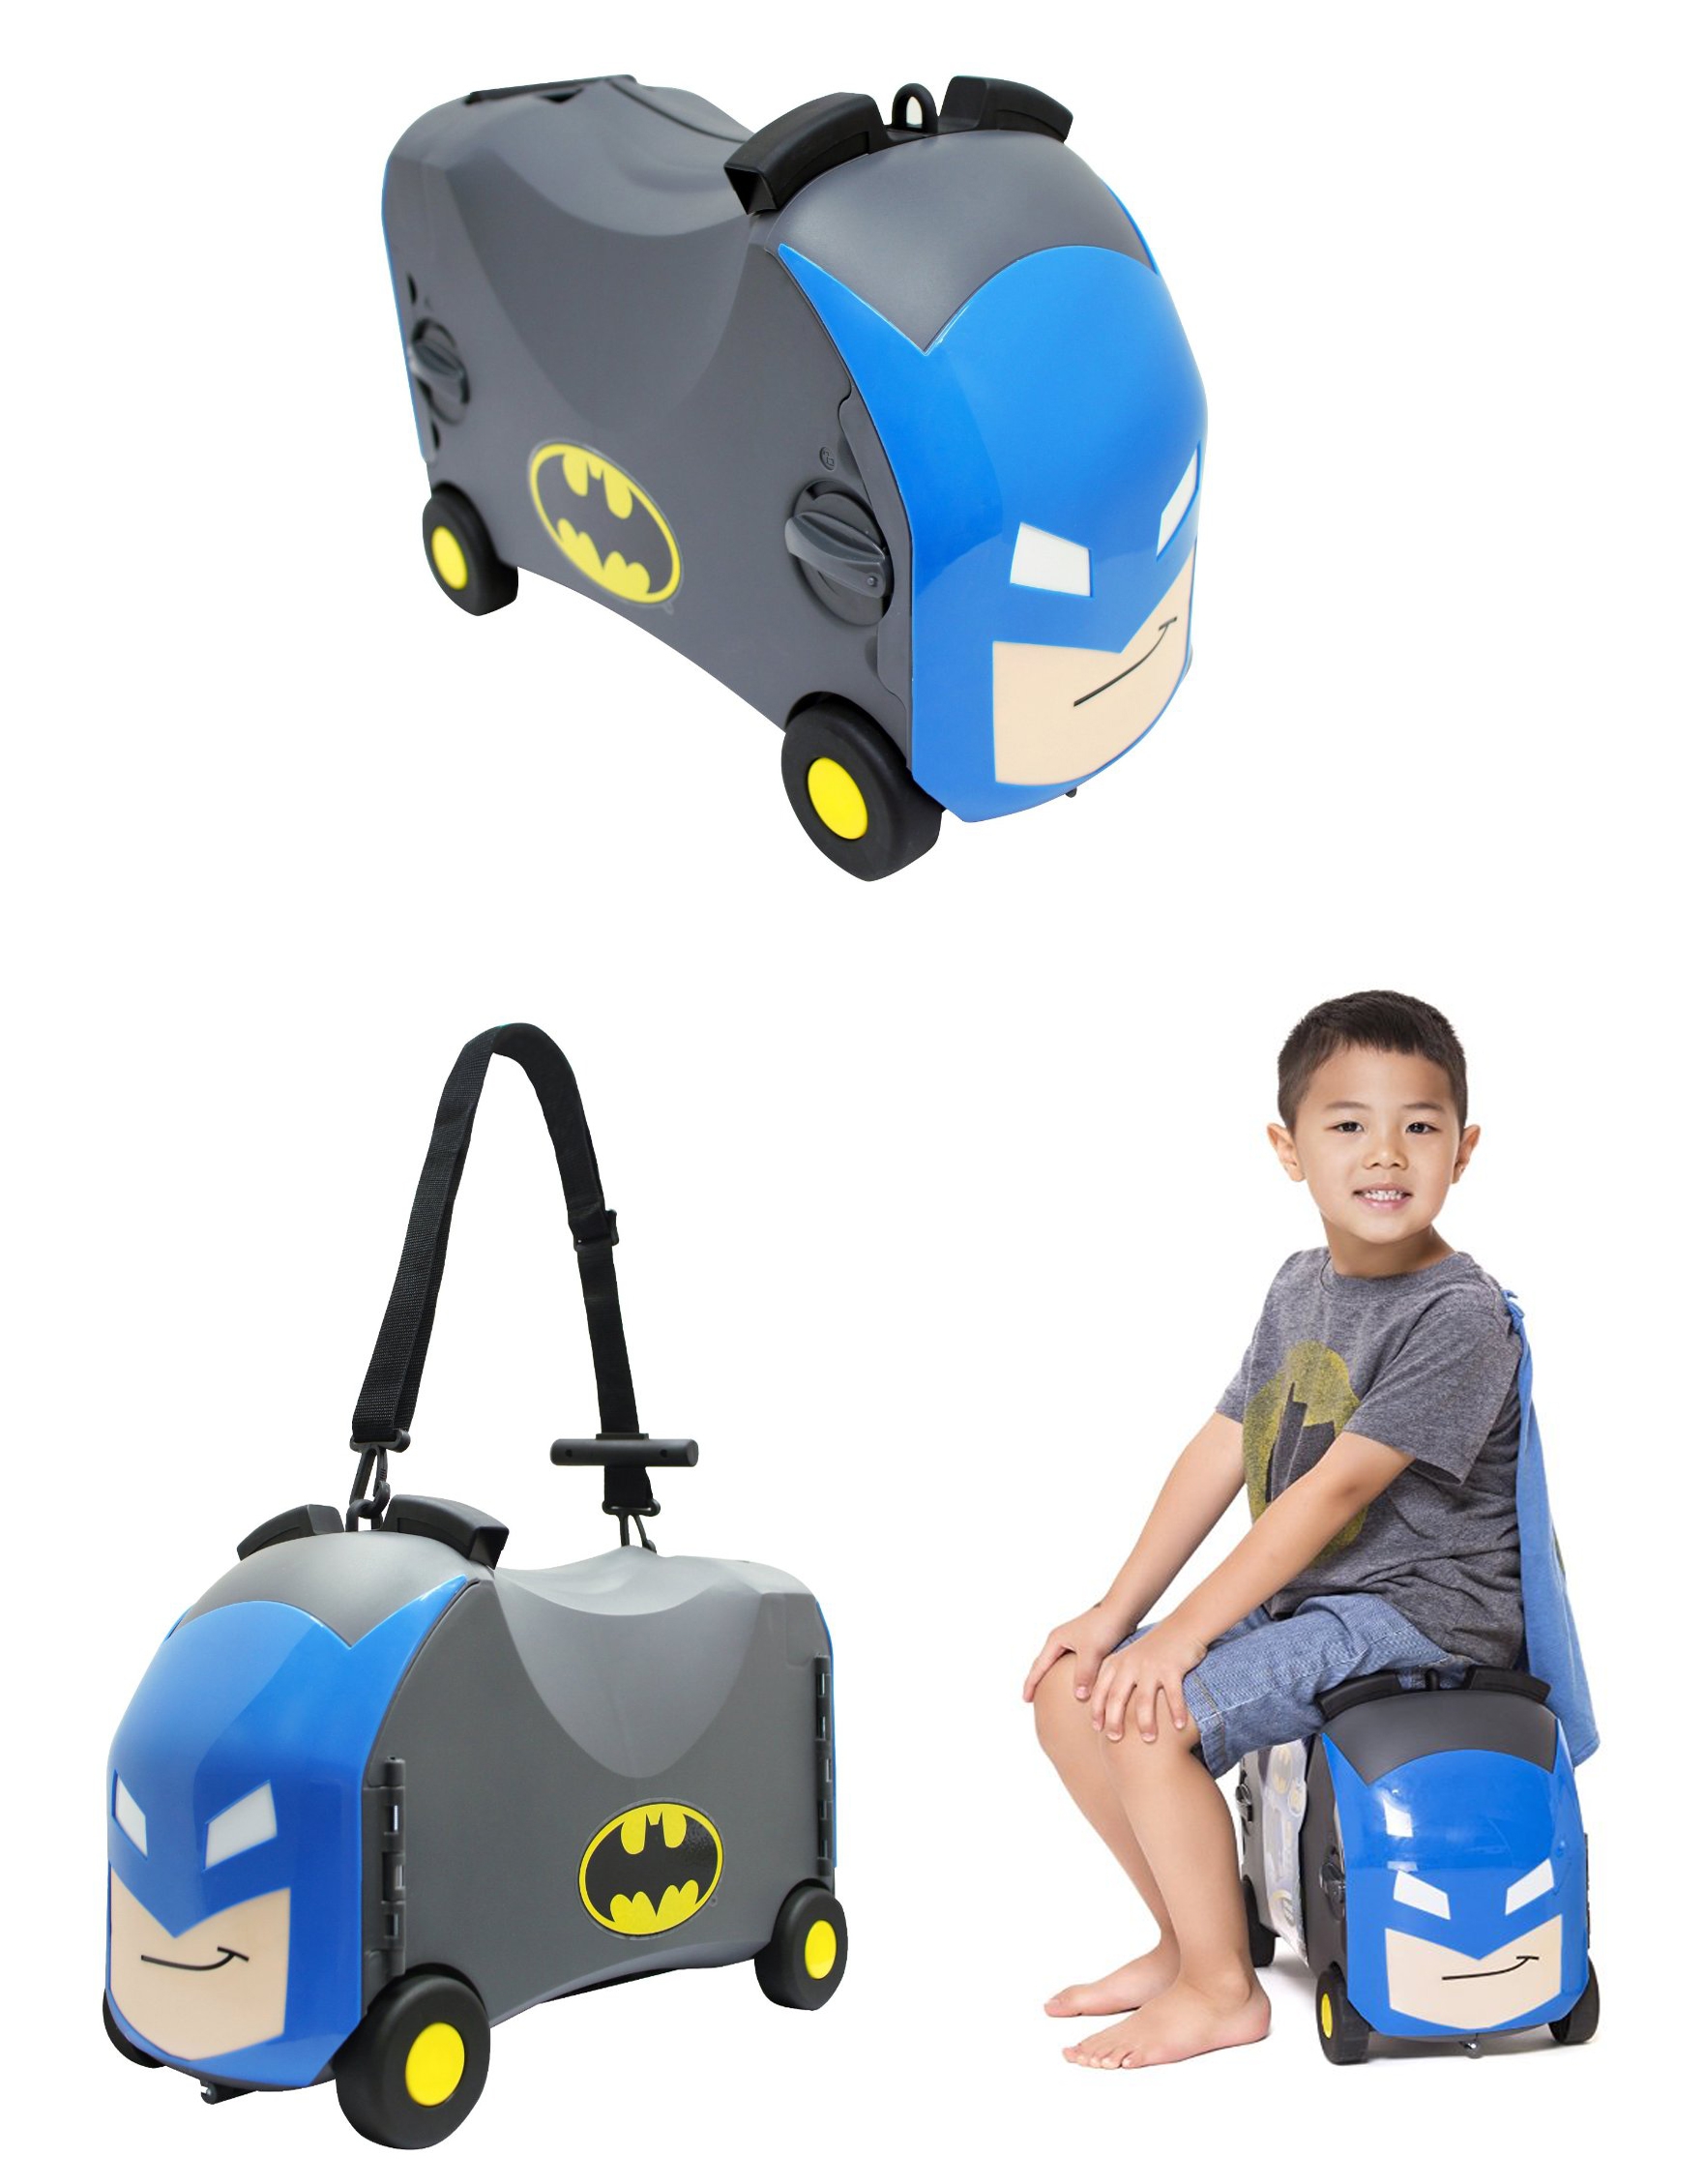 'Batman' Dc Superhero Pull Along Suitcase Hand Luggage Ride on Toy Box Ages 3 To 6 Years